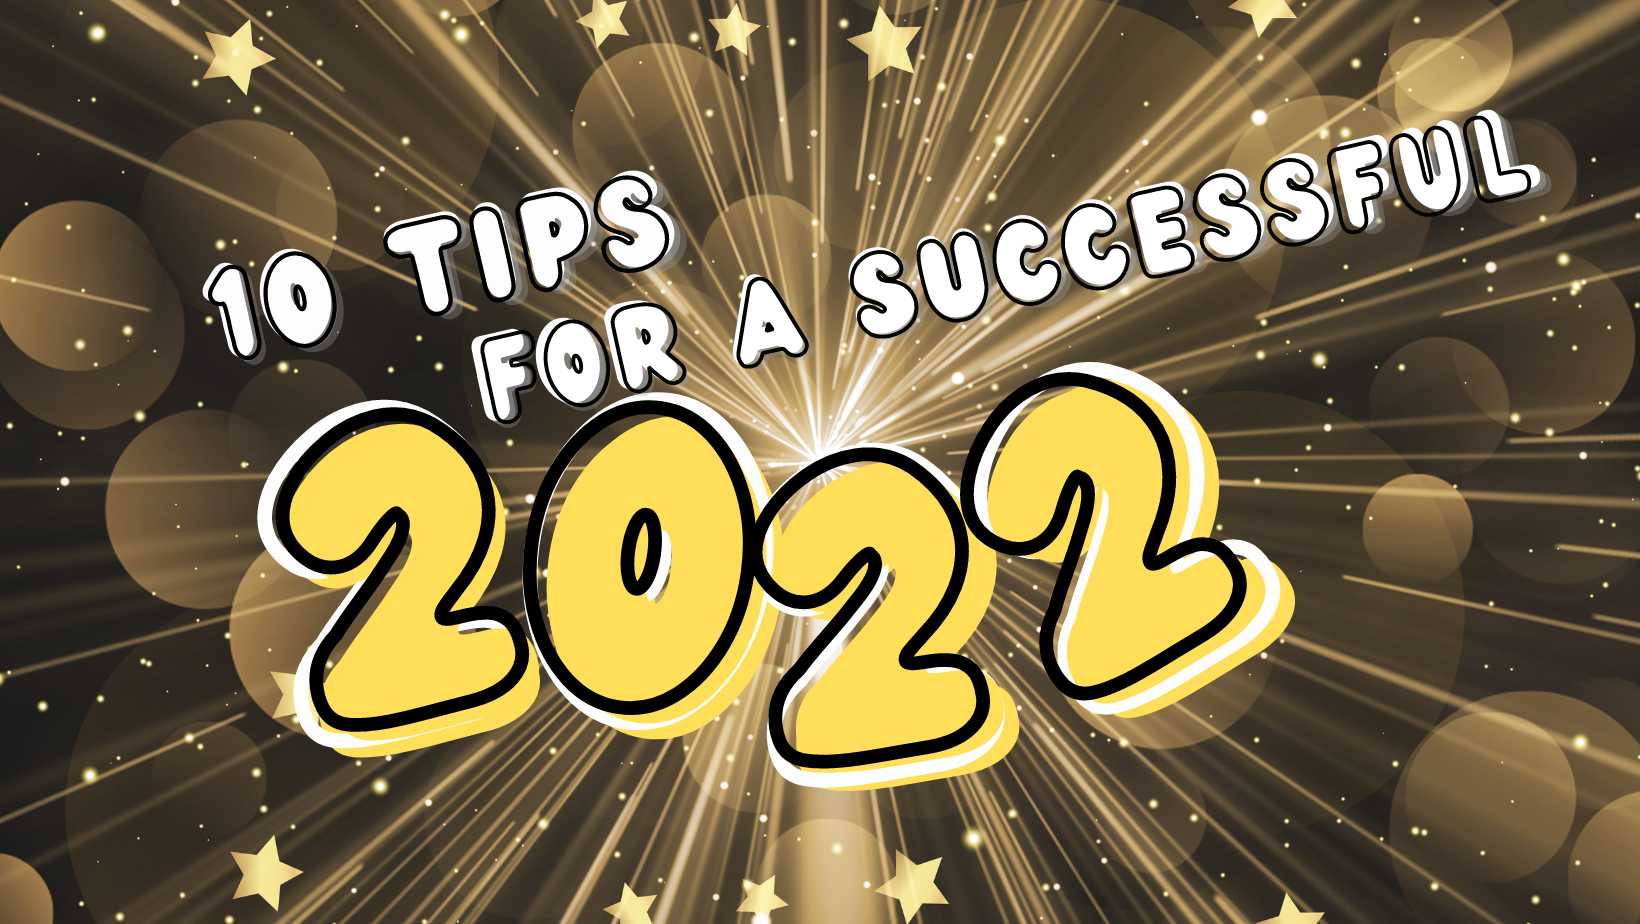 Ep. 14: 10 Tips for a Successful 2022